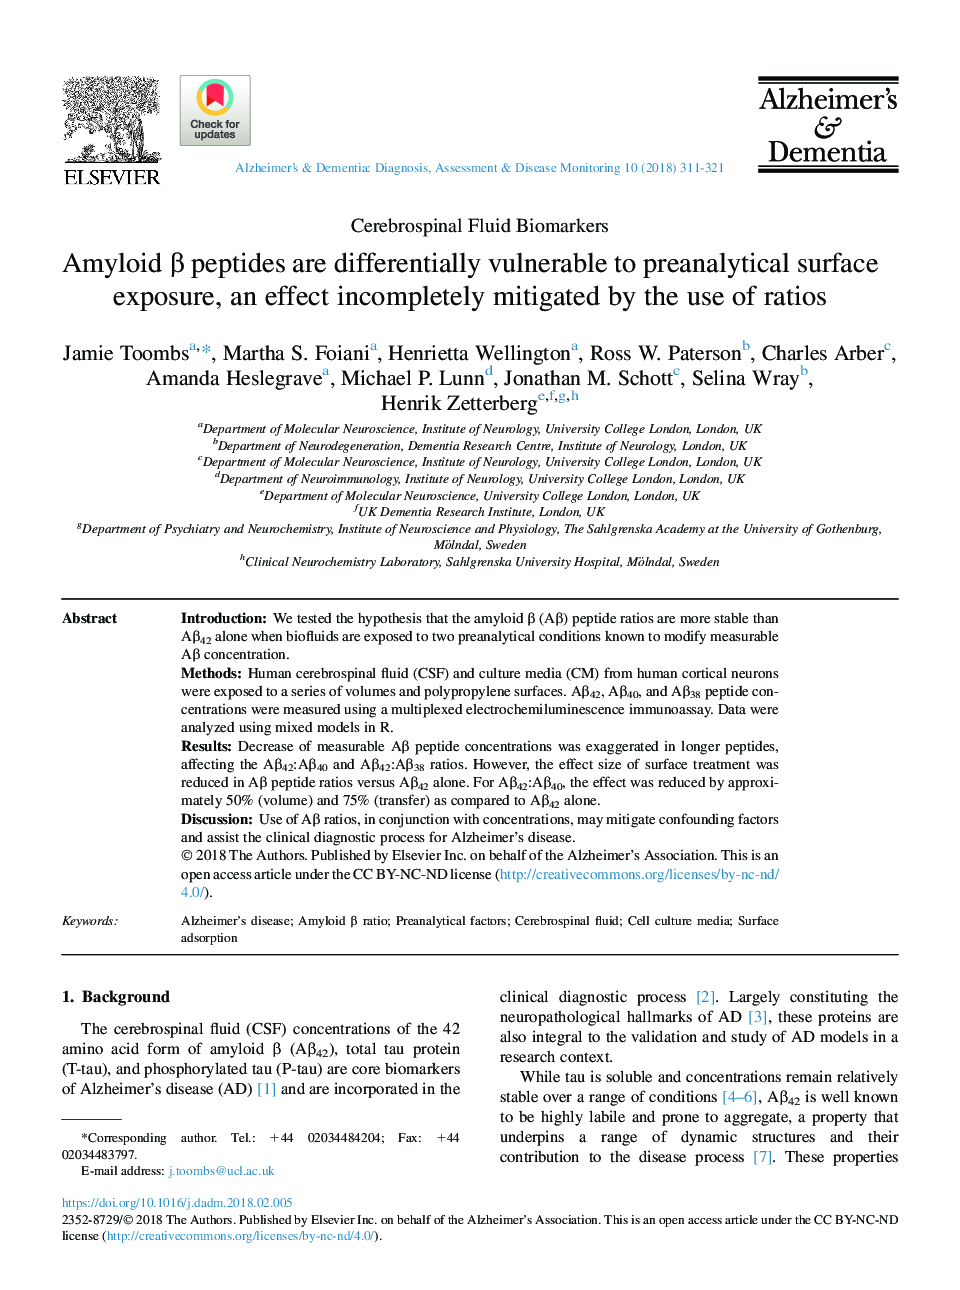 Amyloid Î² peptides are differentially vulnerable to preanalytical surface exposure, an effect incompletely mitigated by the use of ratios